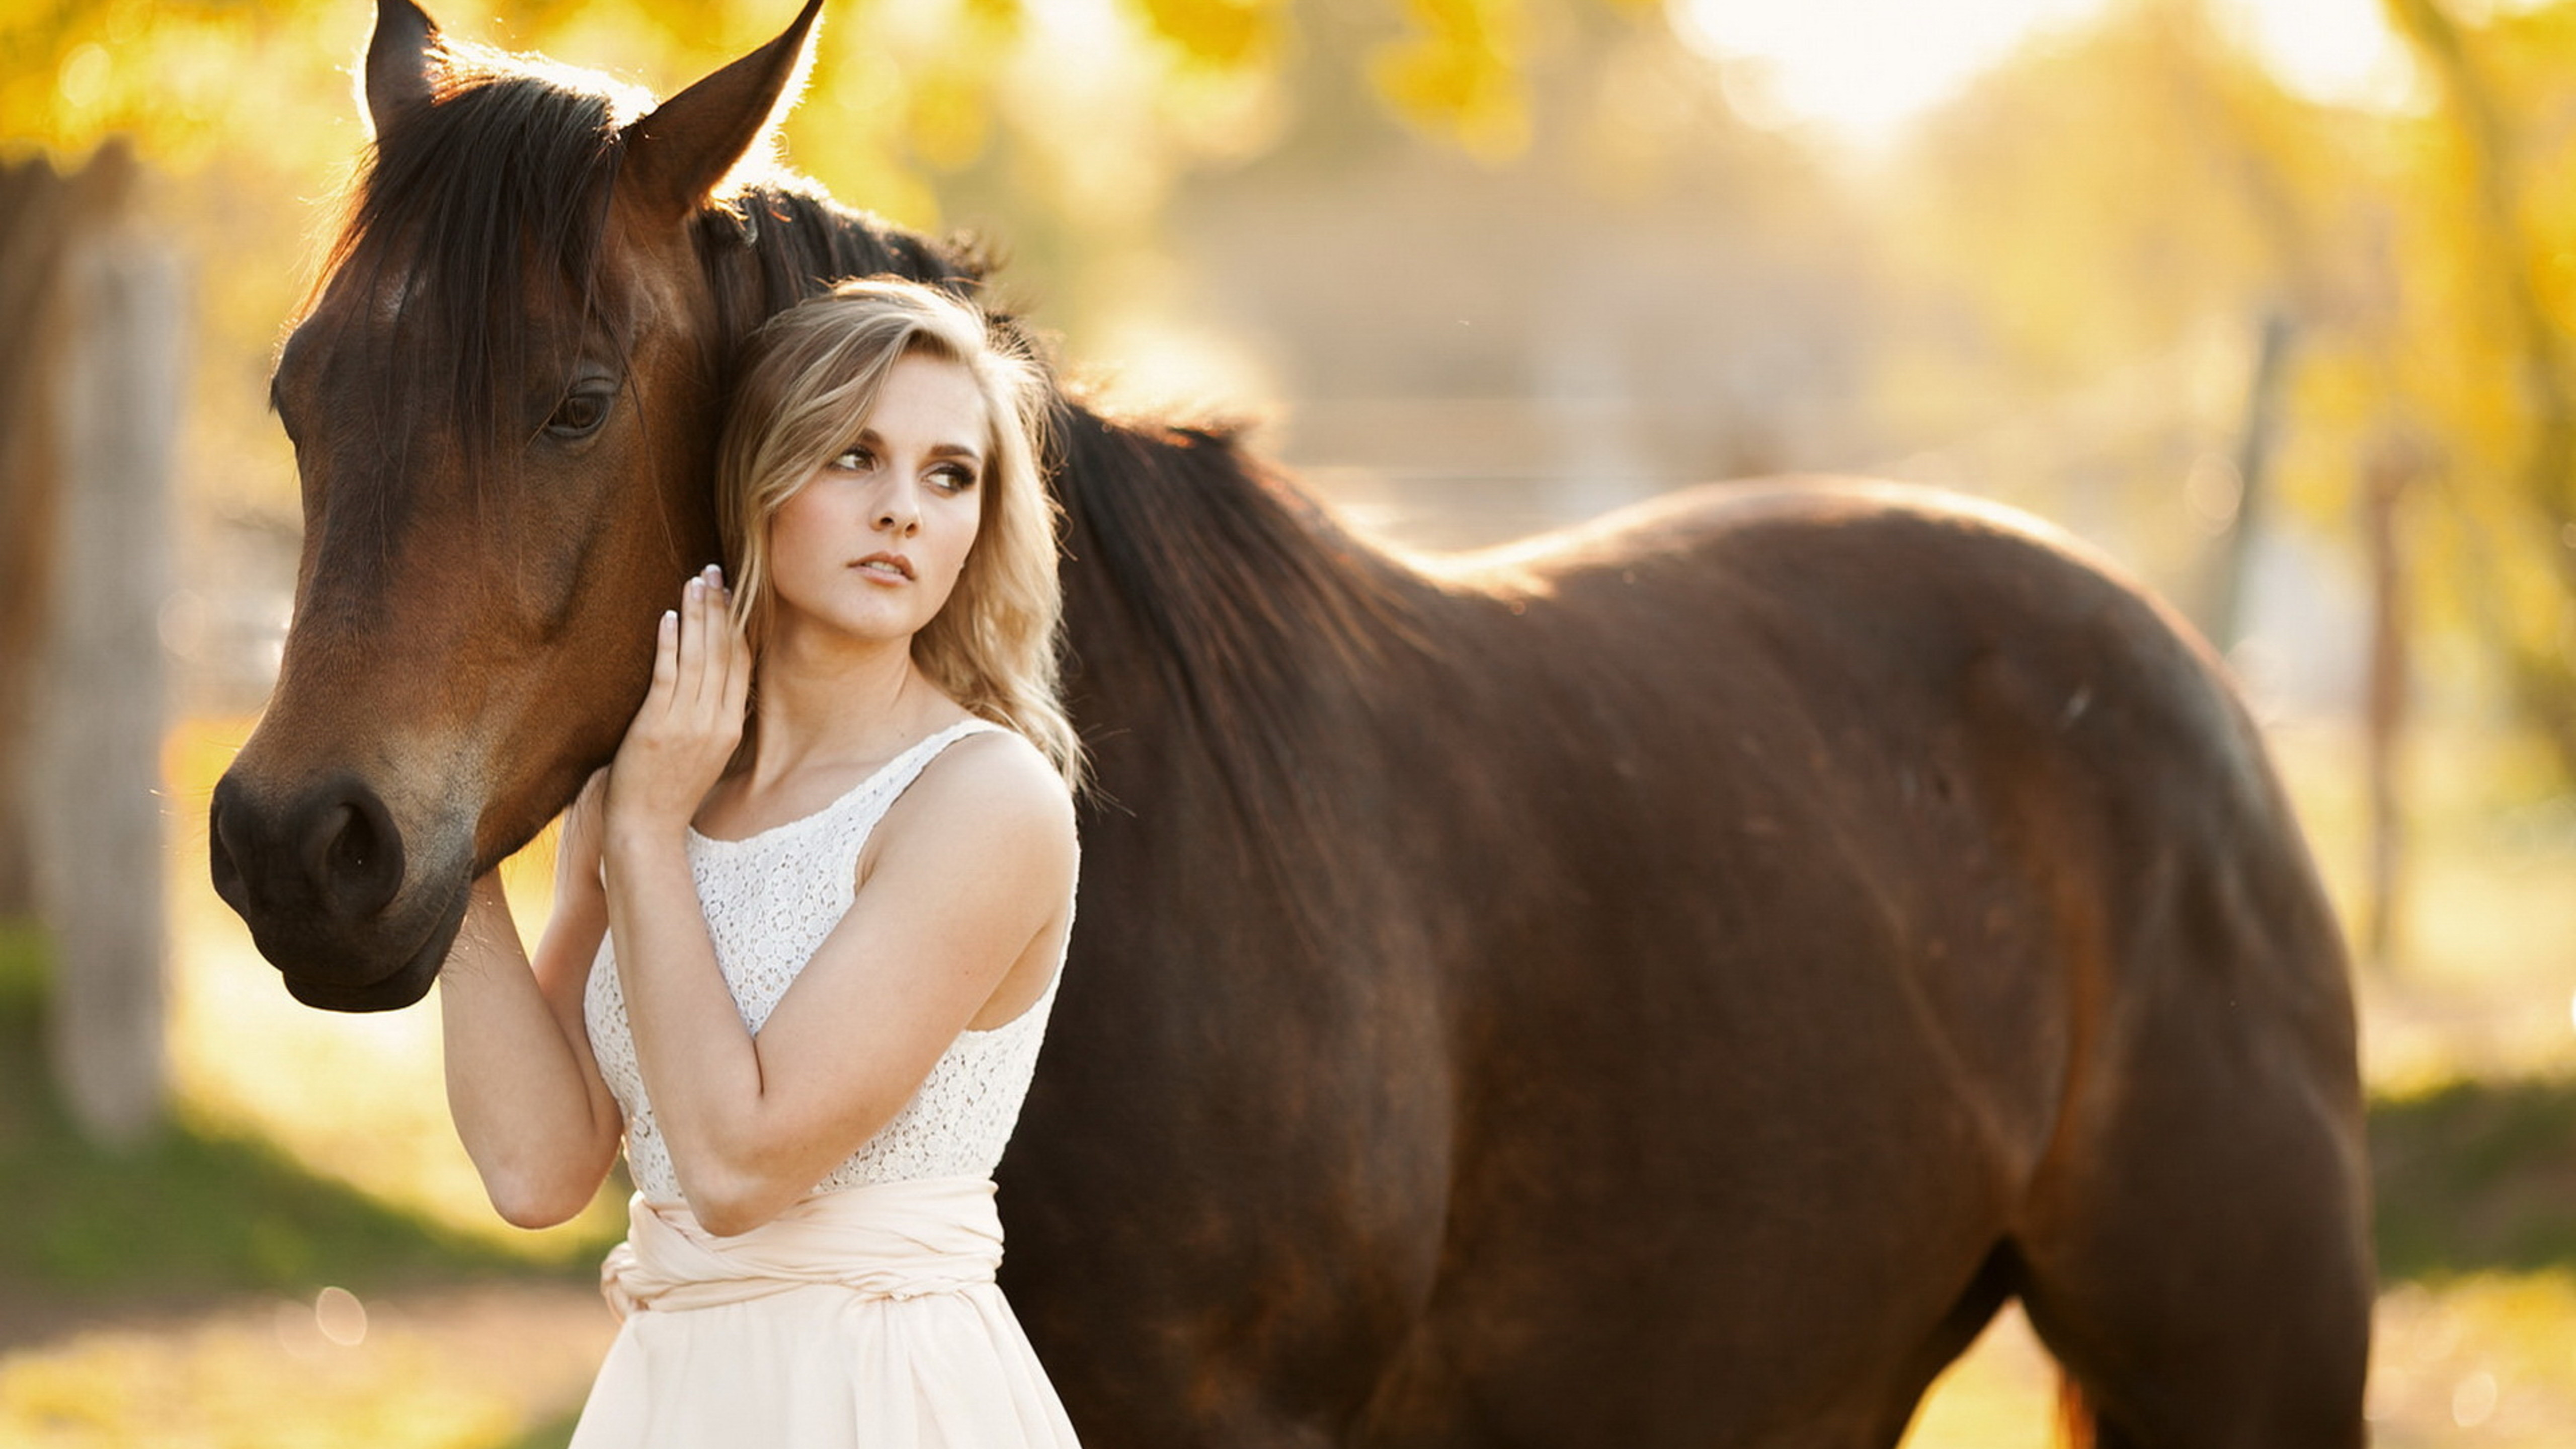 Pretty blonde girl and a brown horse Wallpaper Download 5120x2880